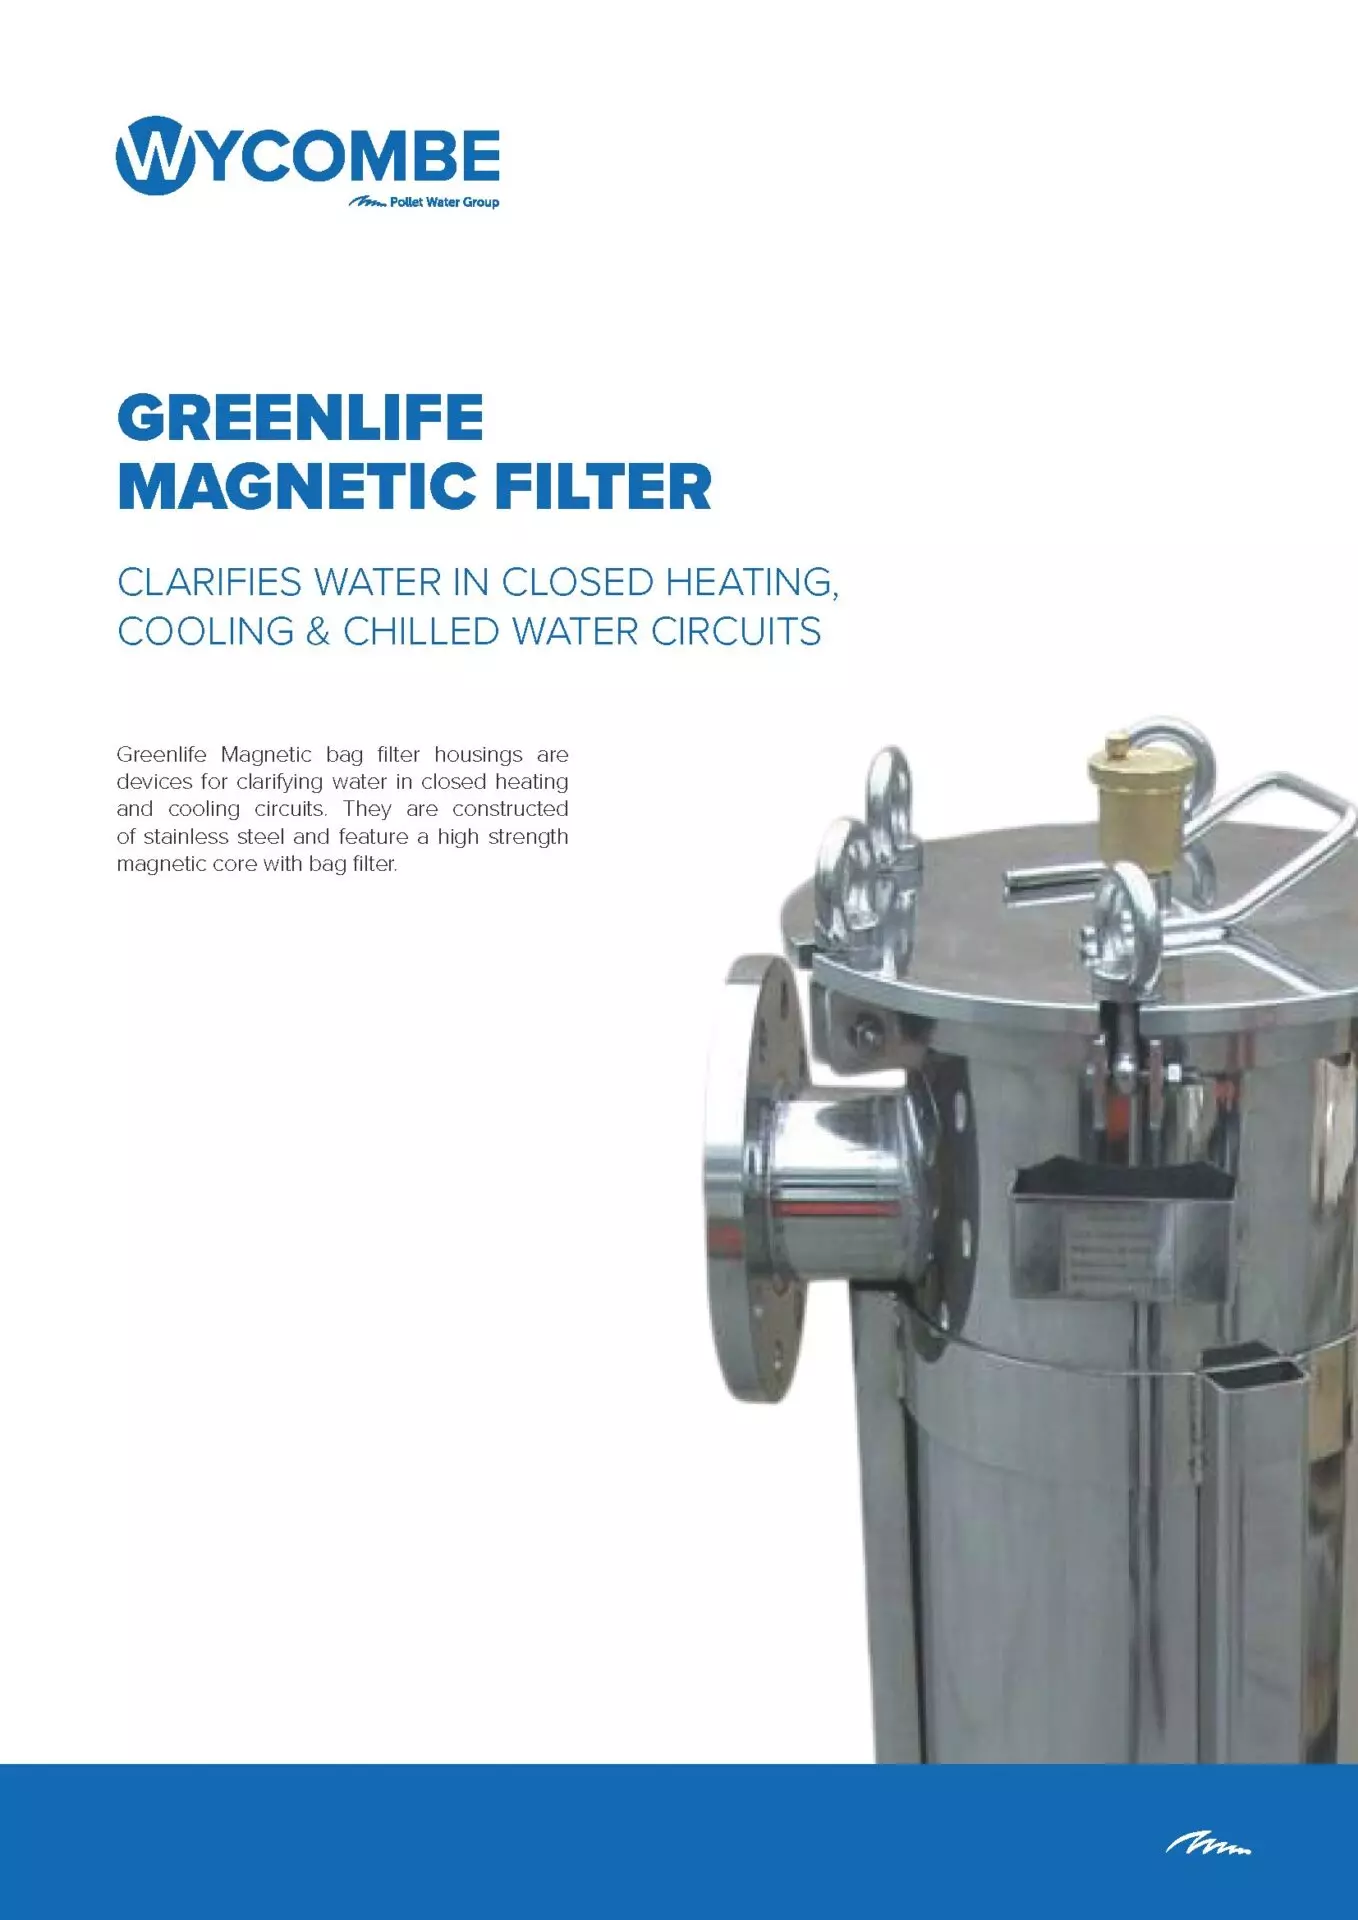 Wycombe Greenlife magnetic filters